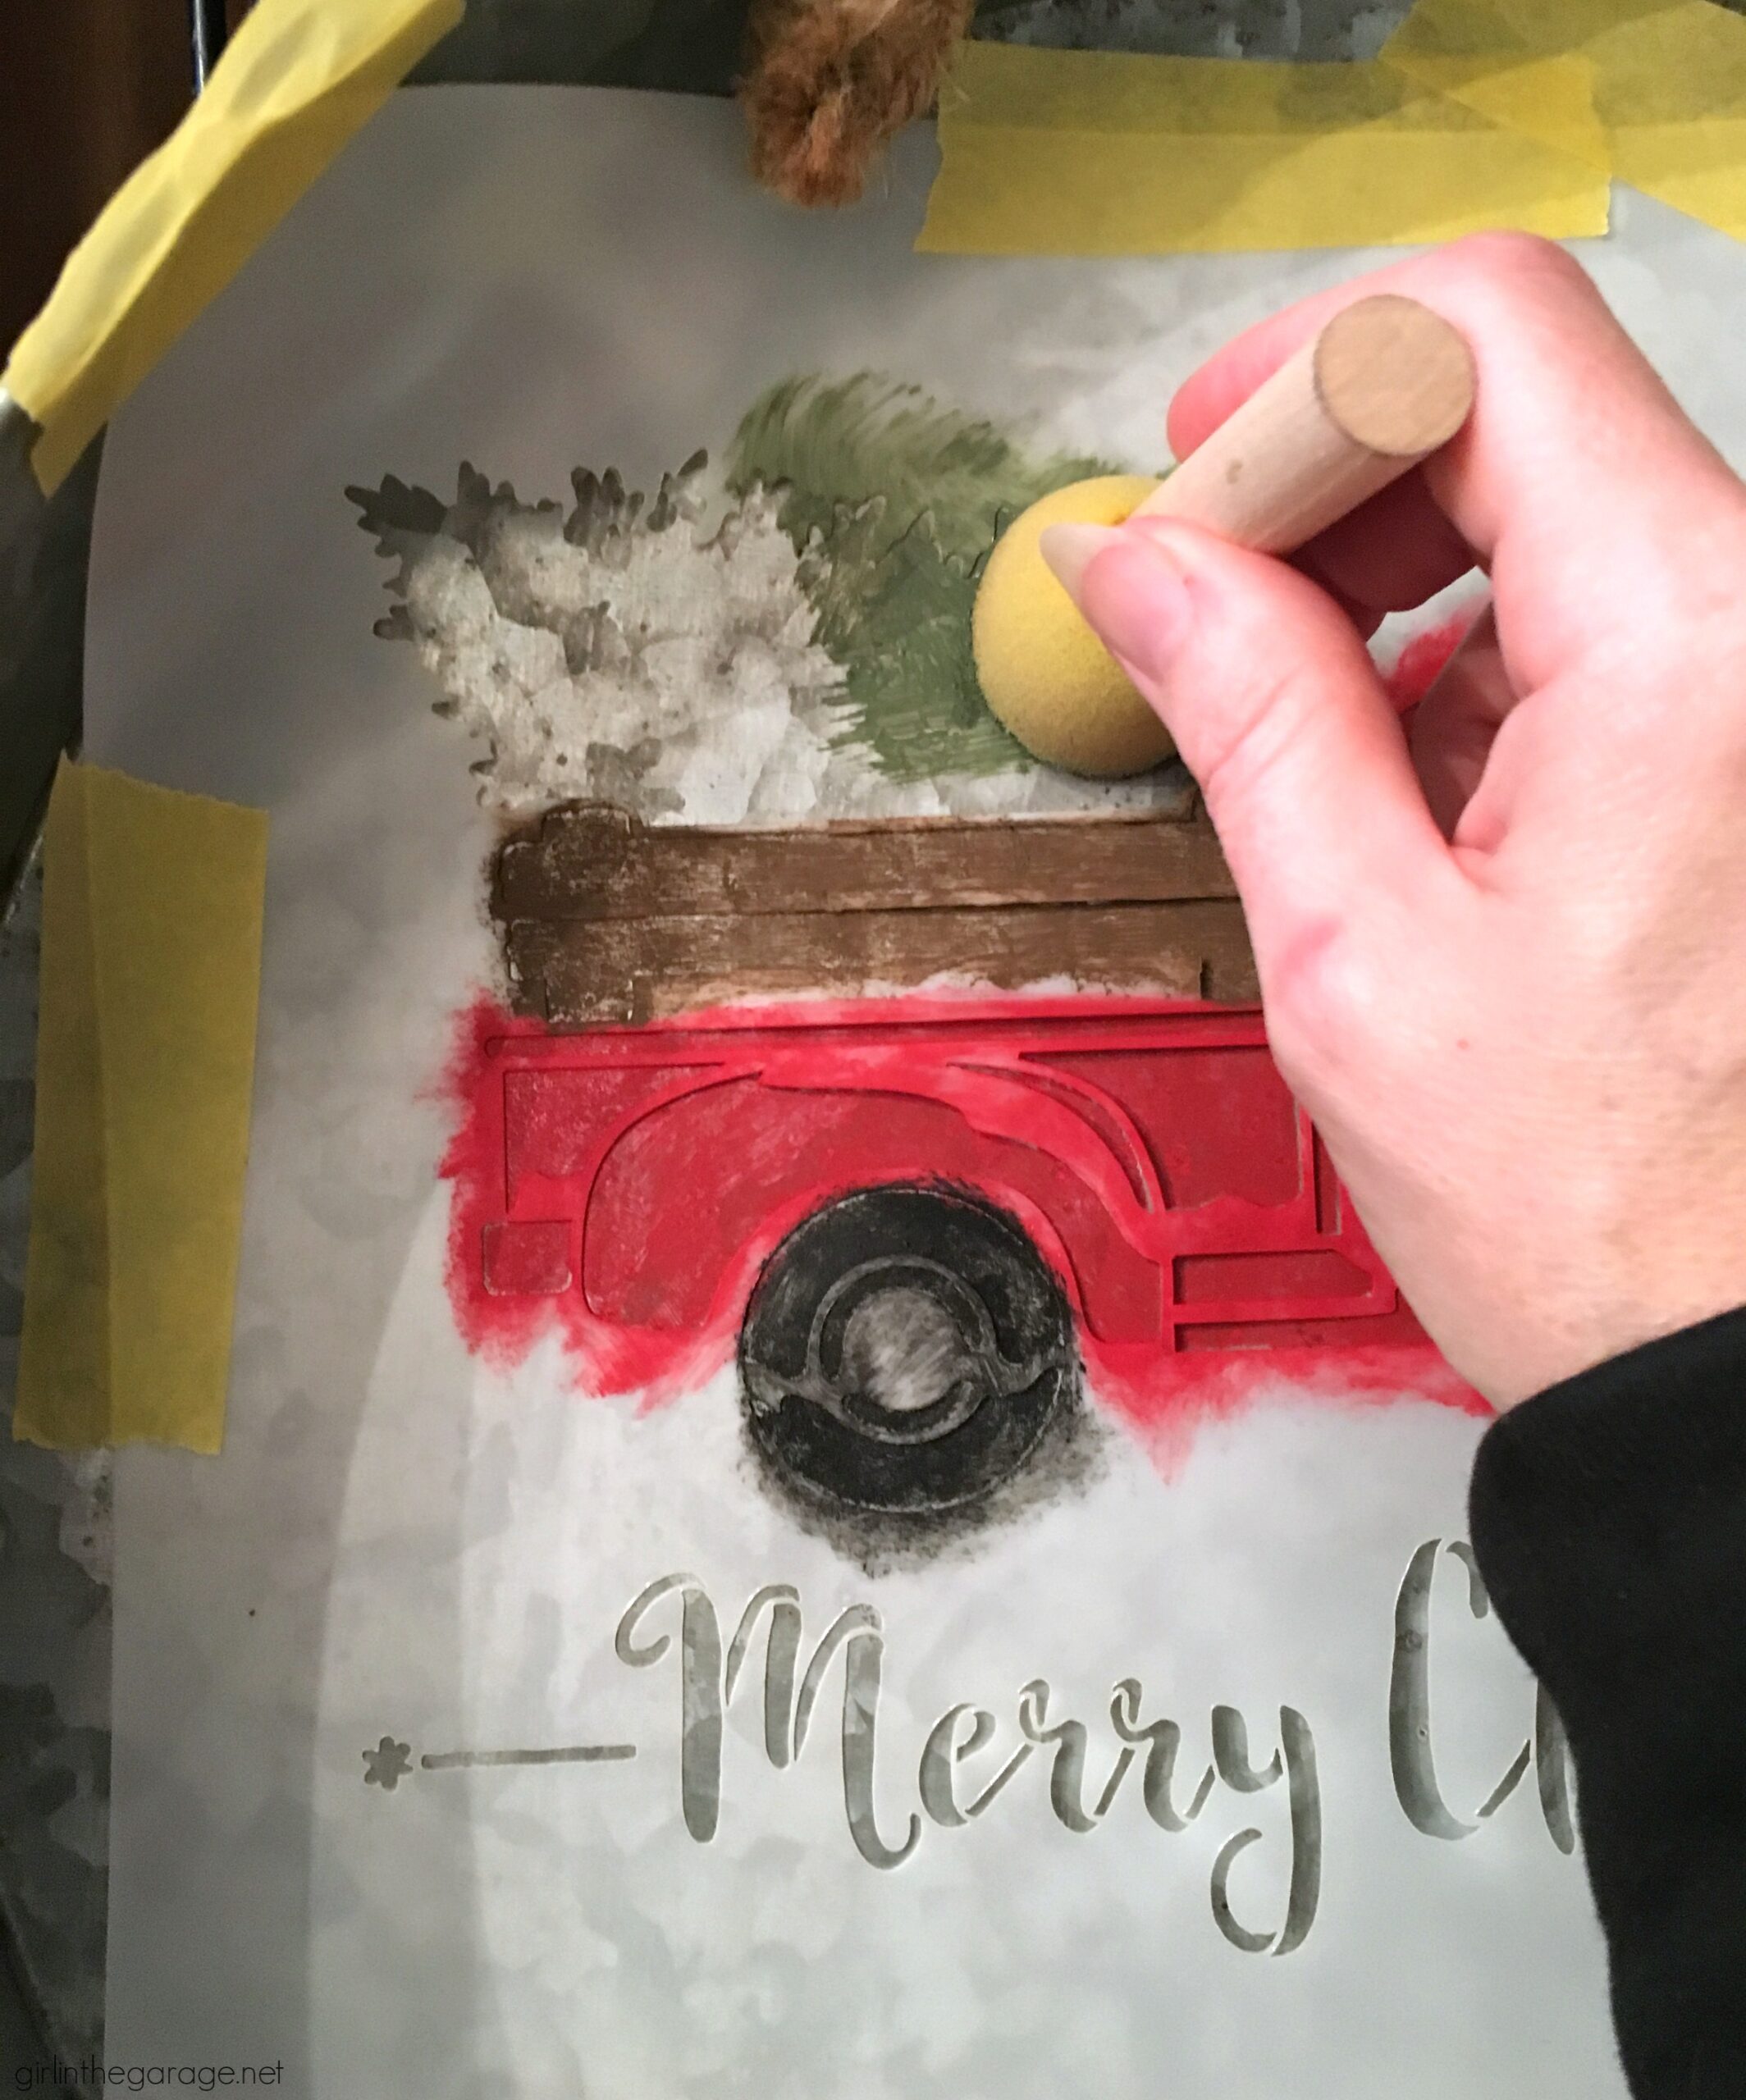 Make a DIY Christmas wreath from a repurposed metal tray - an adorable Christmas decor idea with stenciled truck and miniature bottle brush trees! By Girl in the Garage